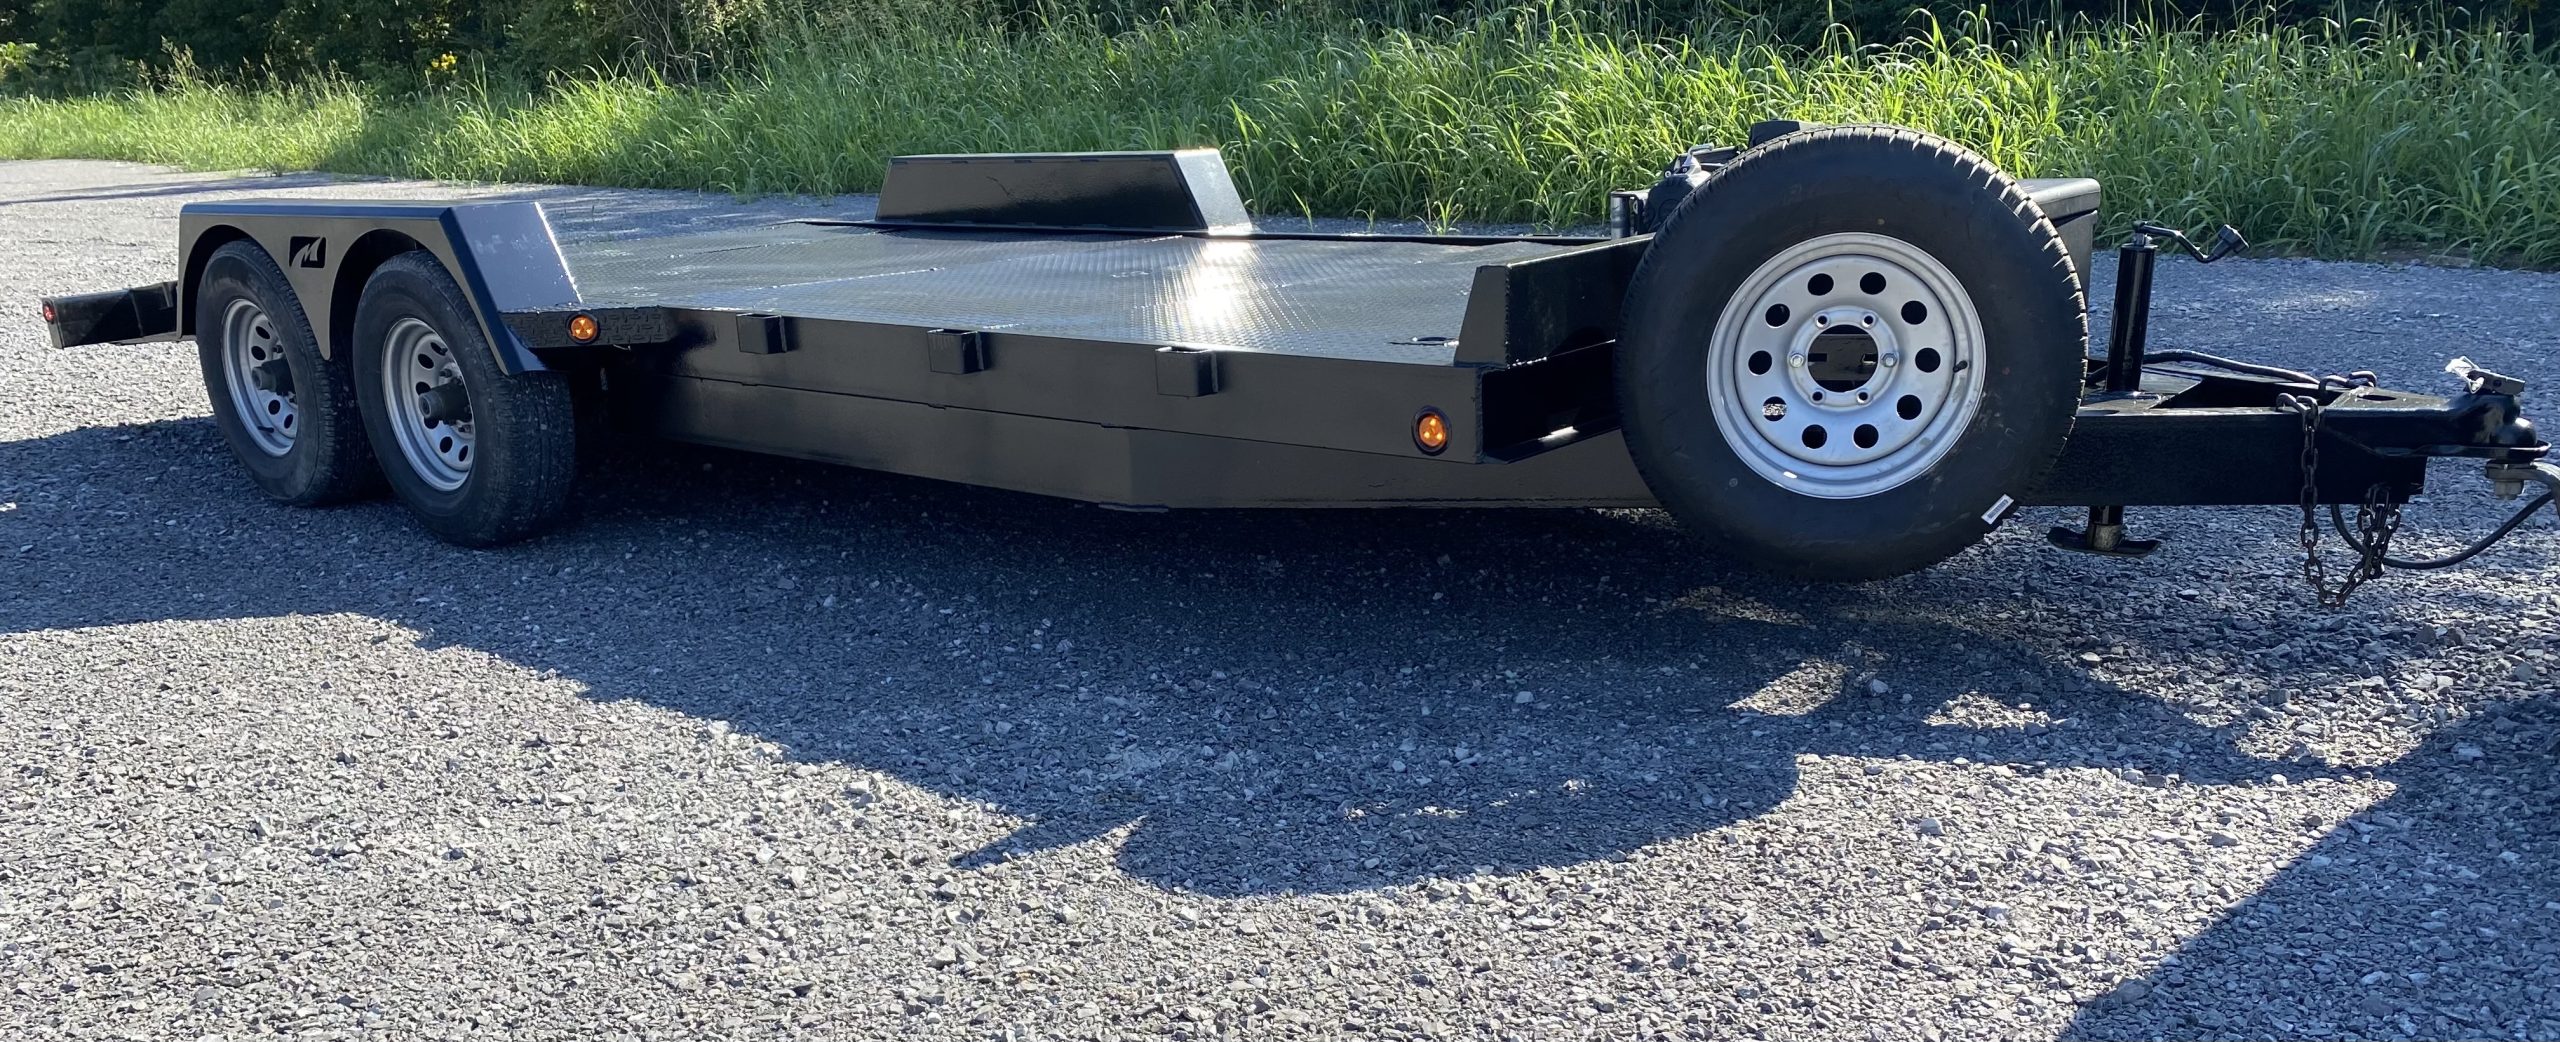 18’ HD Flatbed Car Hauler with drive over fenders